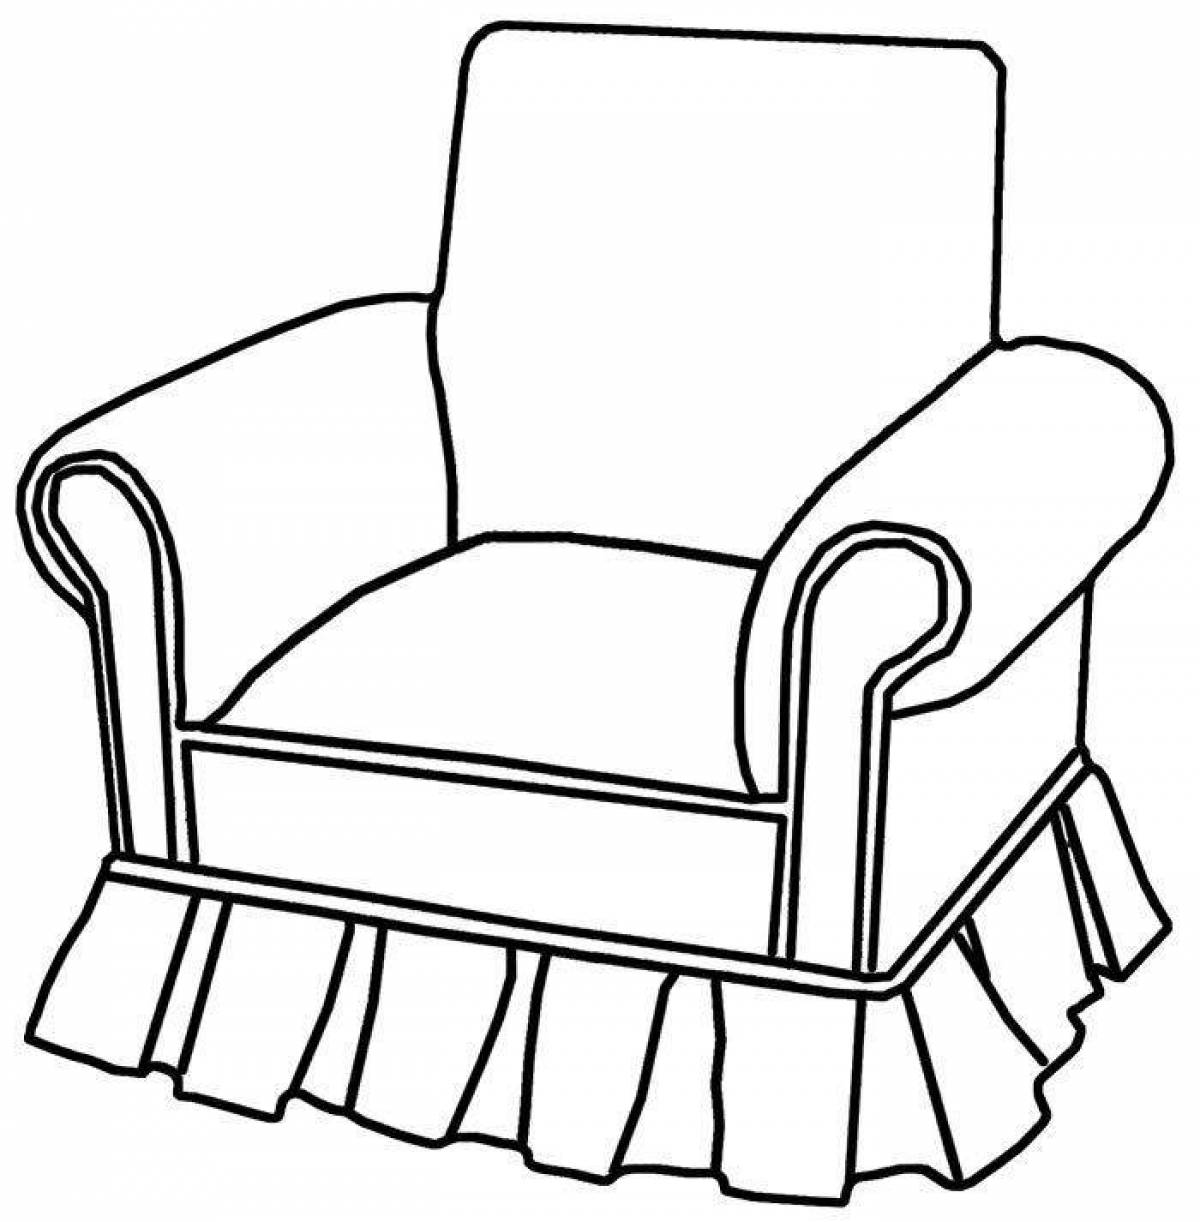 Attractive coloring of furniture of the middle group